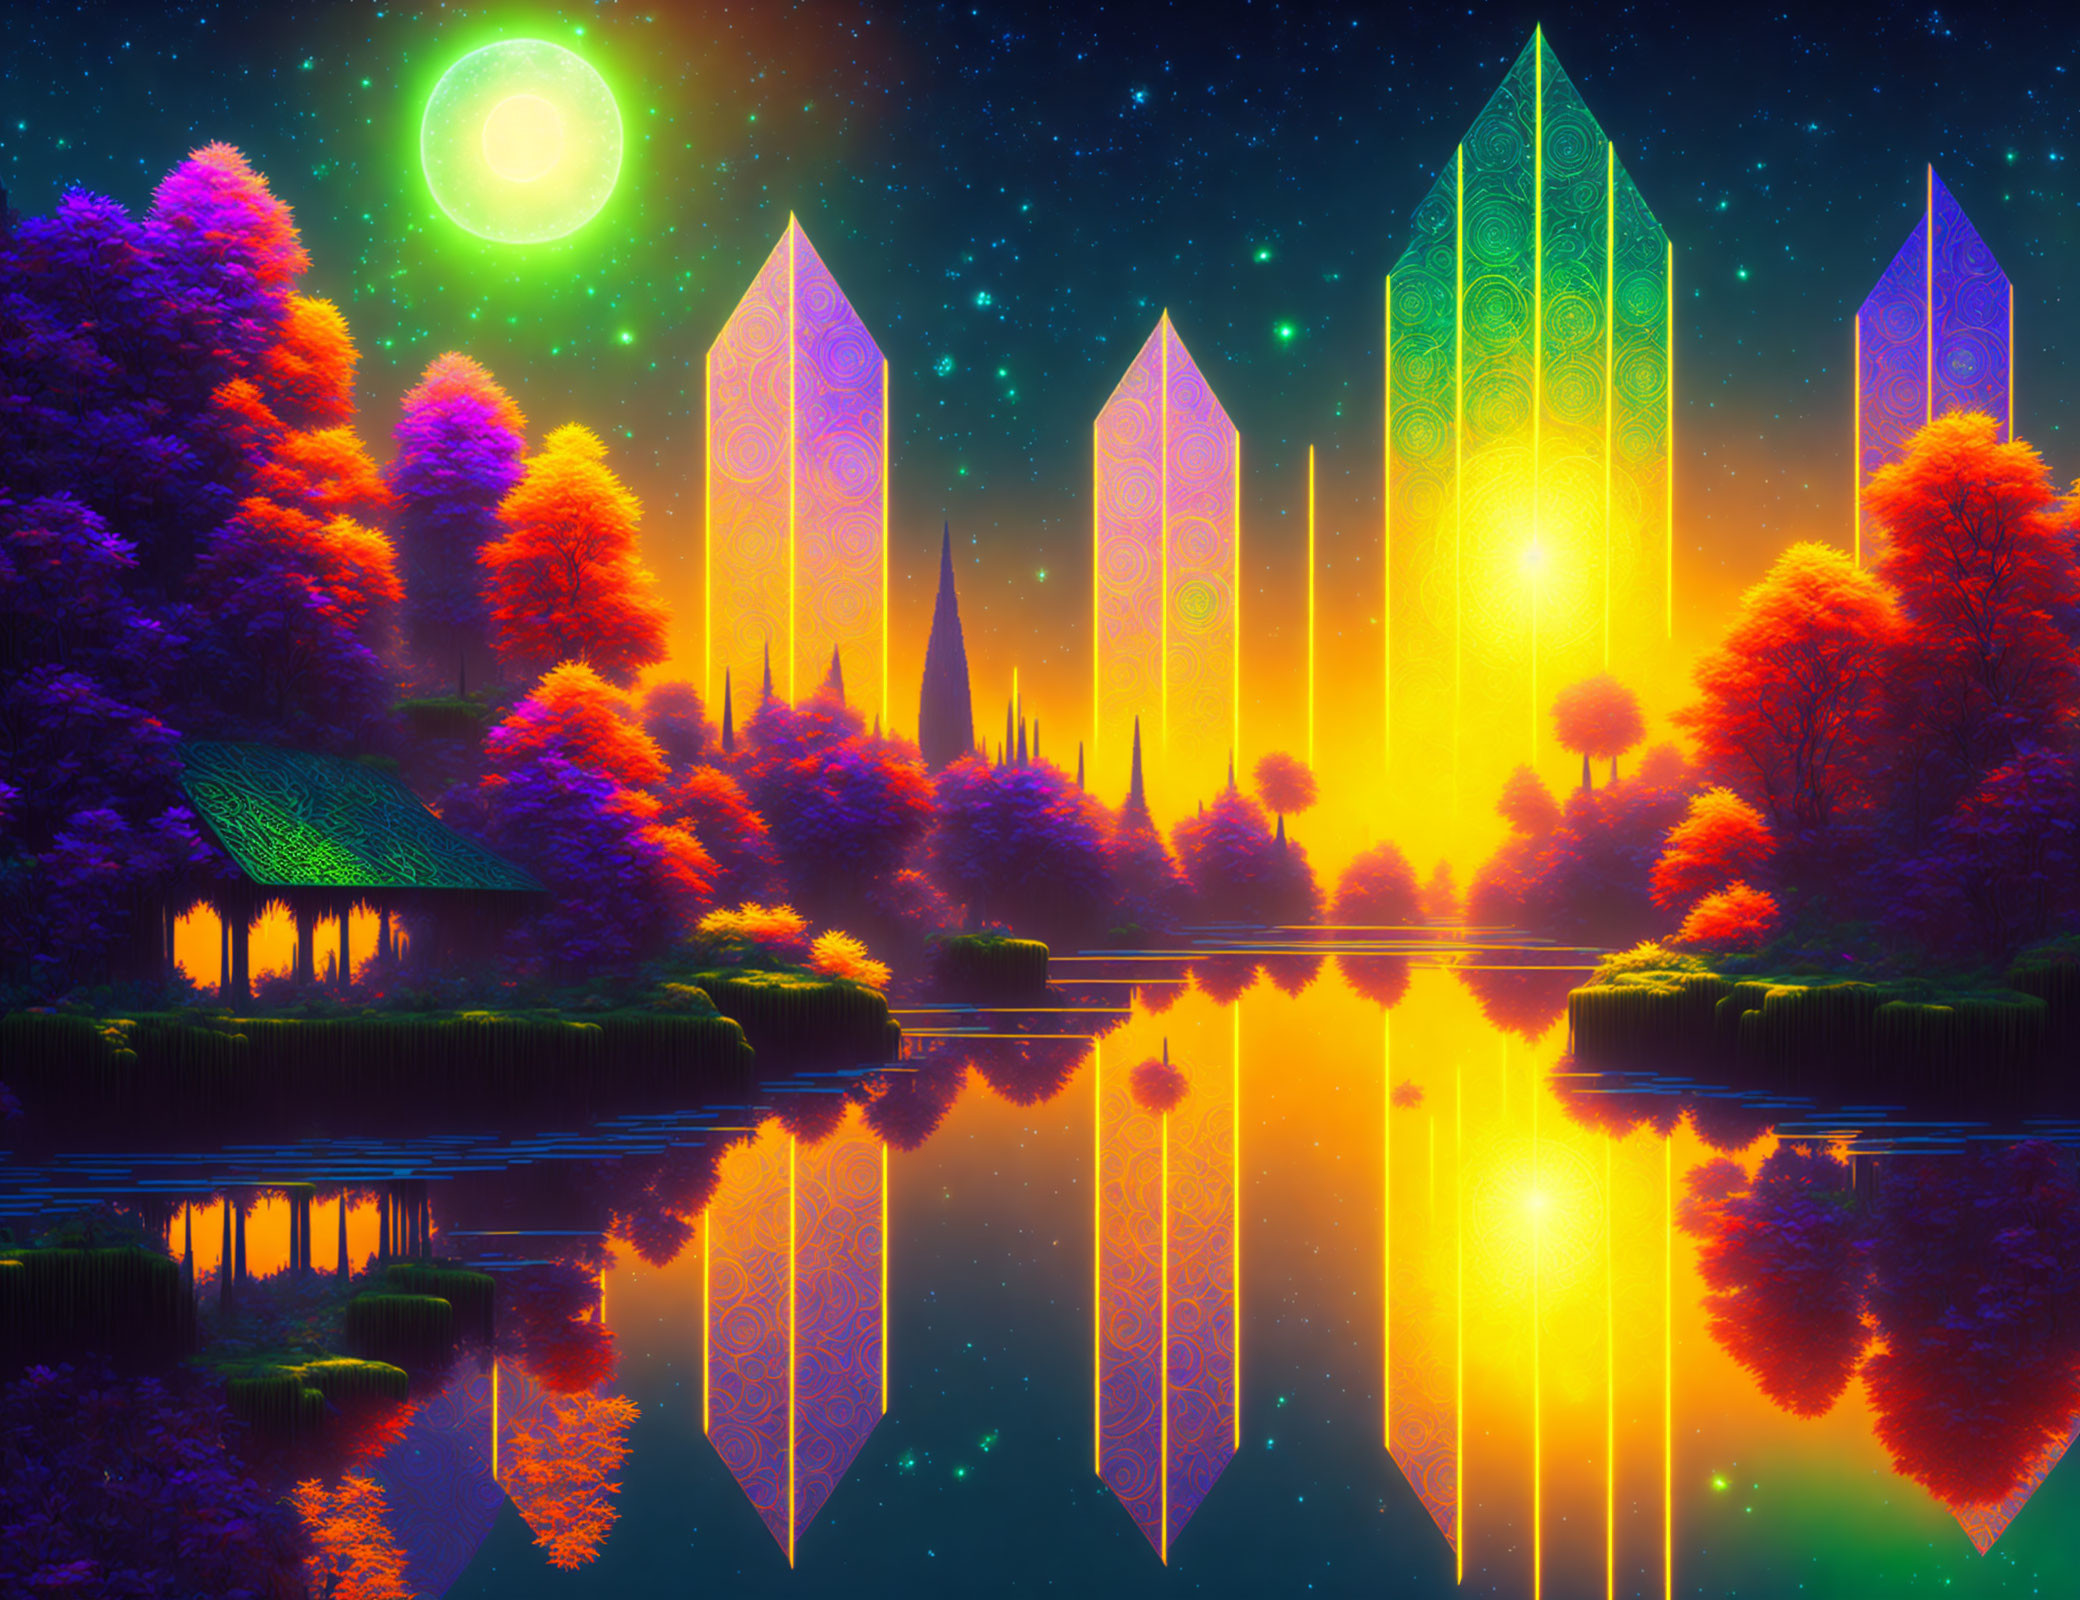 Fantasy landscape with glowing crystals, luminescent trees, calm lake, quaint cottage, radiant moon